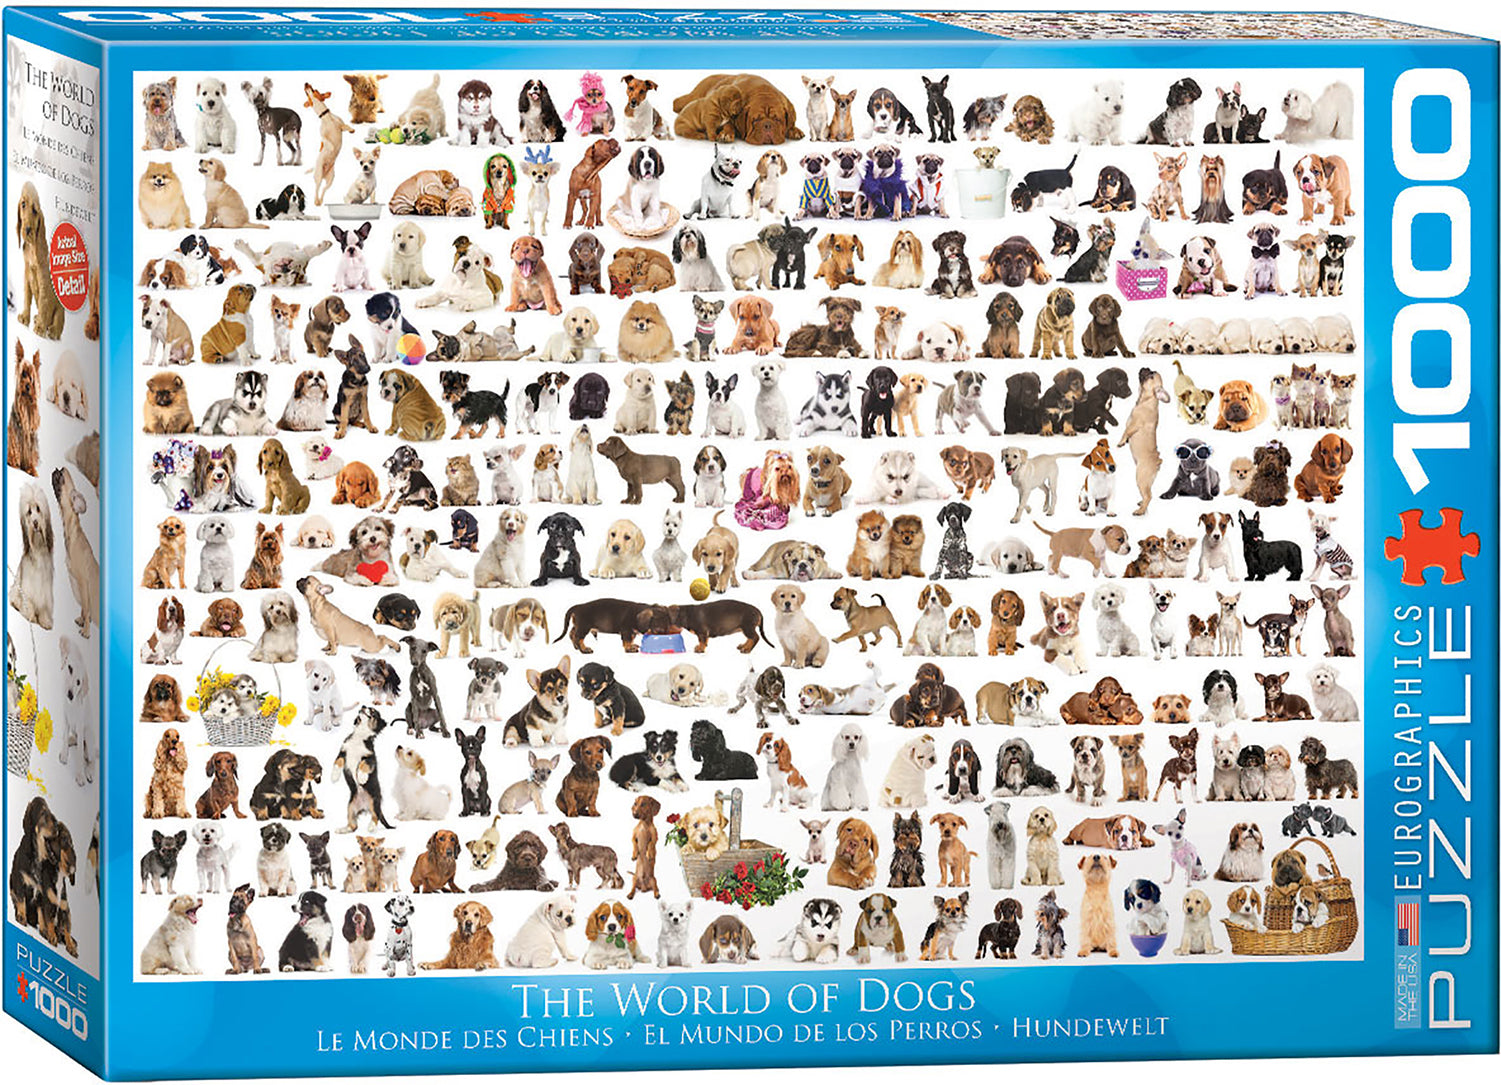 The World of Dogs 1000 Piece Jigsaw Puzzle